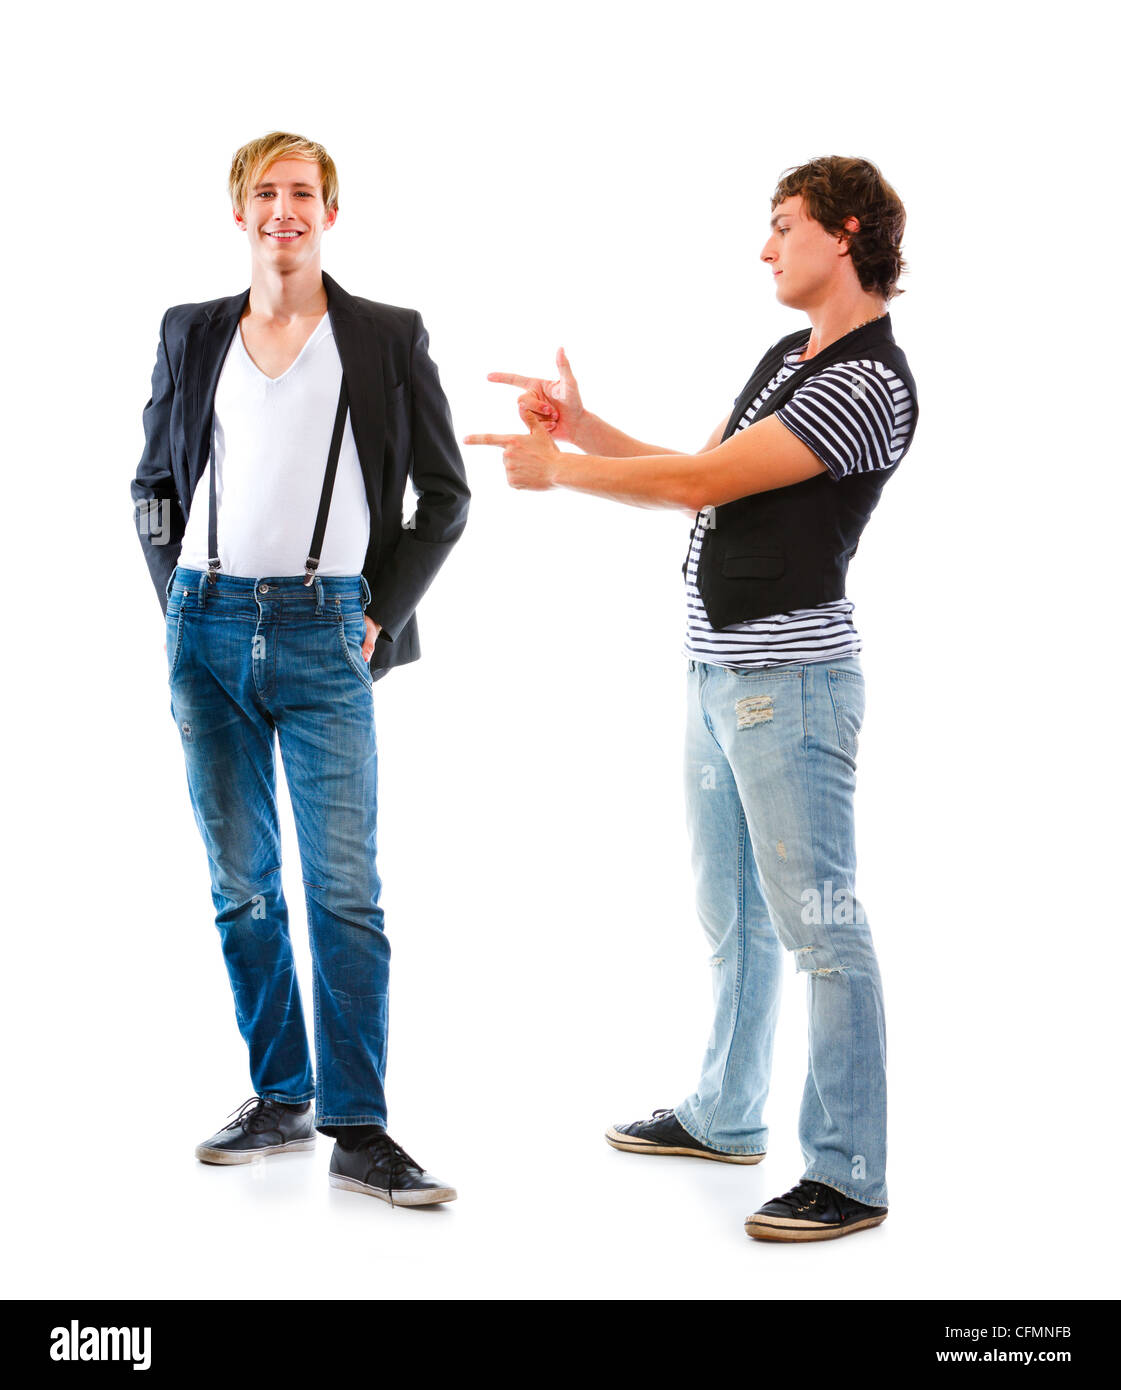 Young modern man pointing on his friend. Isolated on white Stock Photo